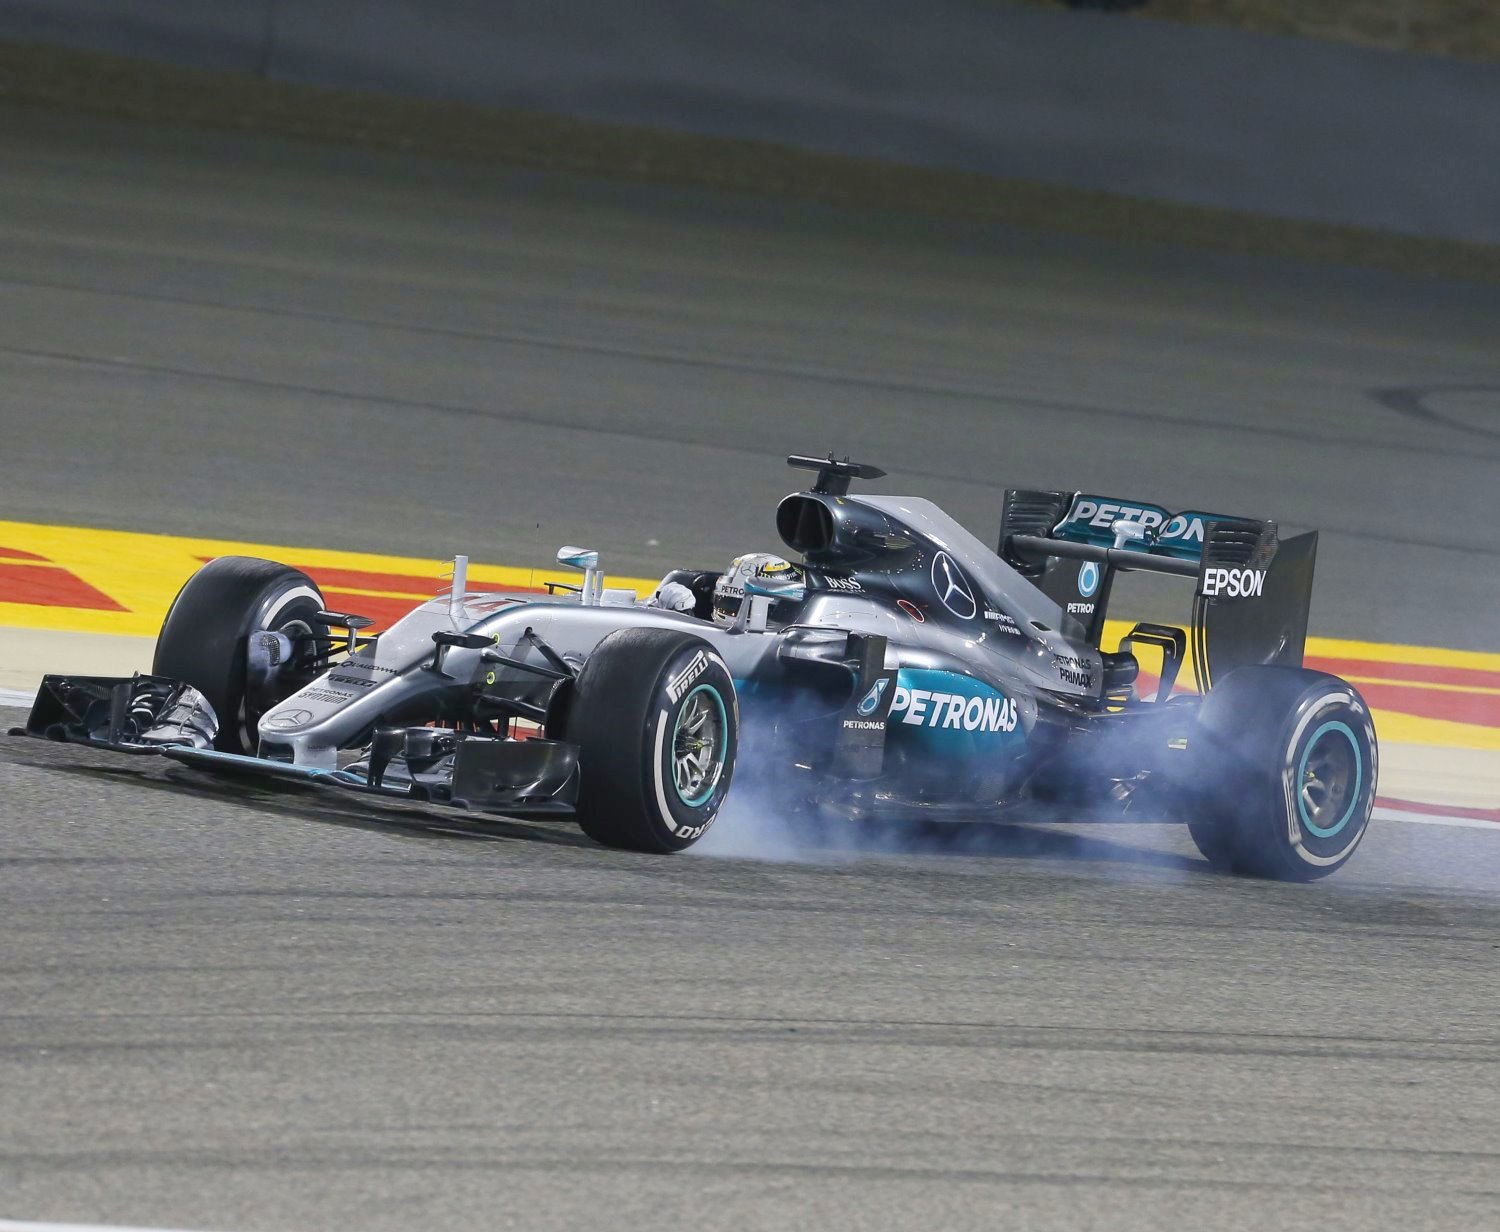 Hamilton charges hard in vain to catch Rosberg